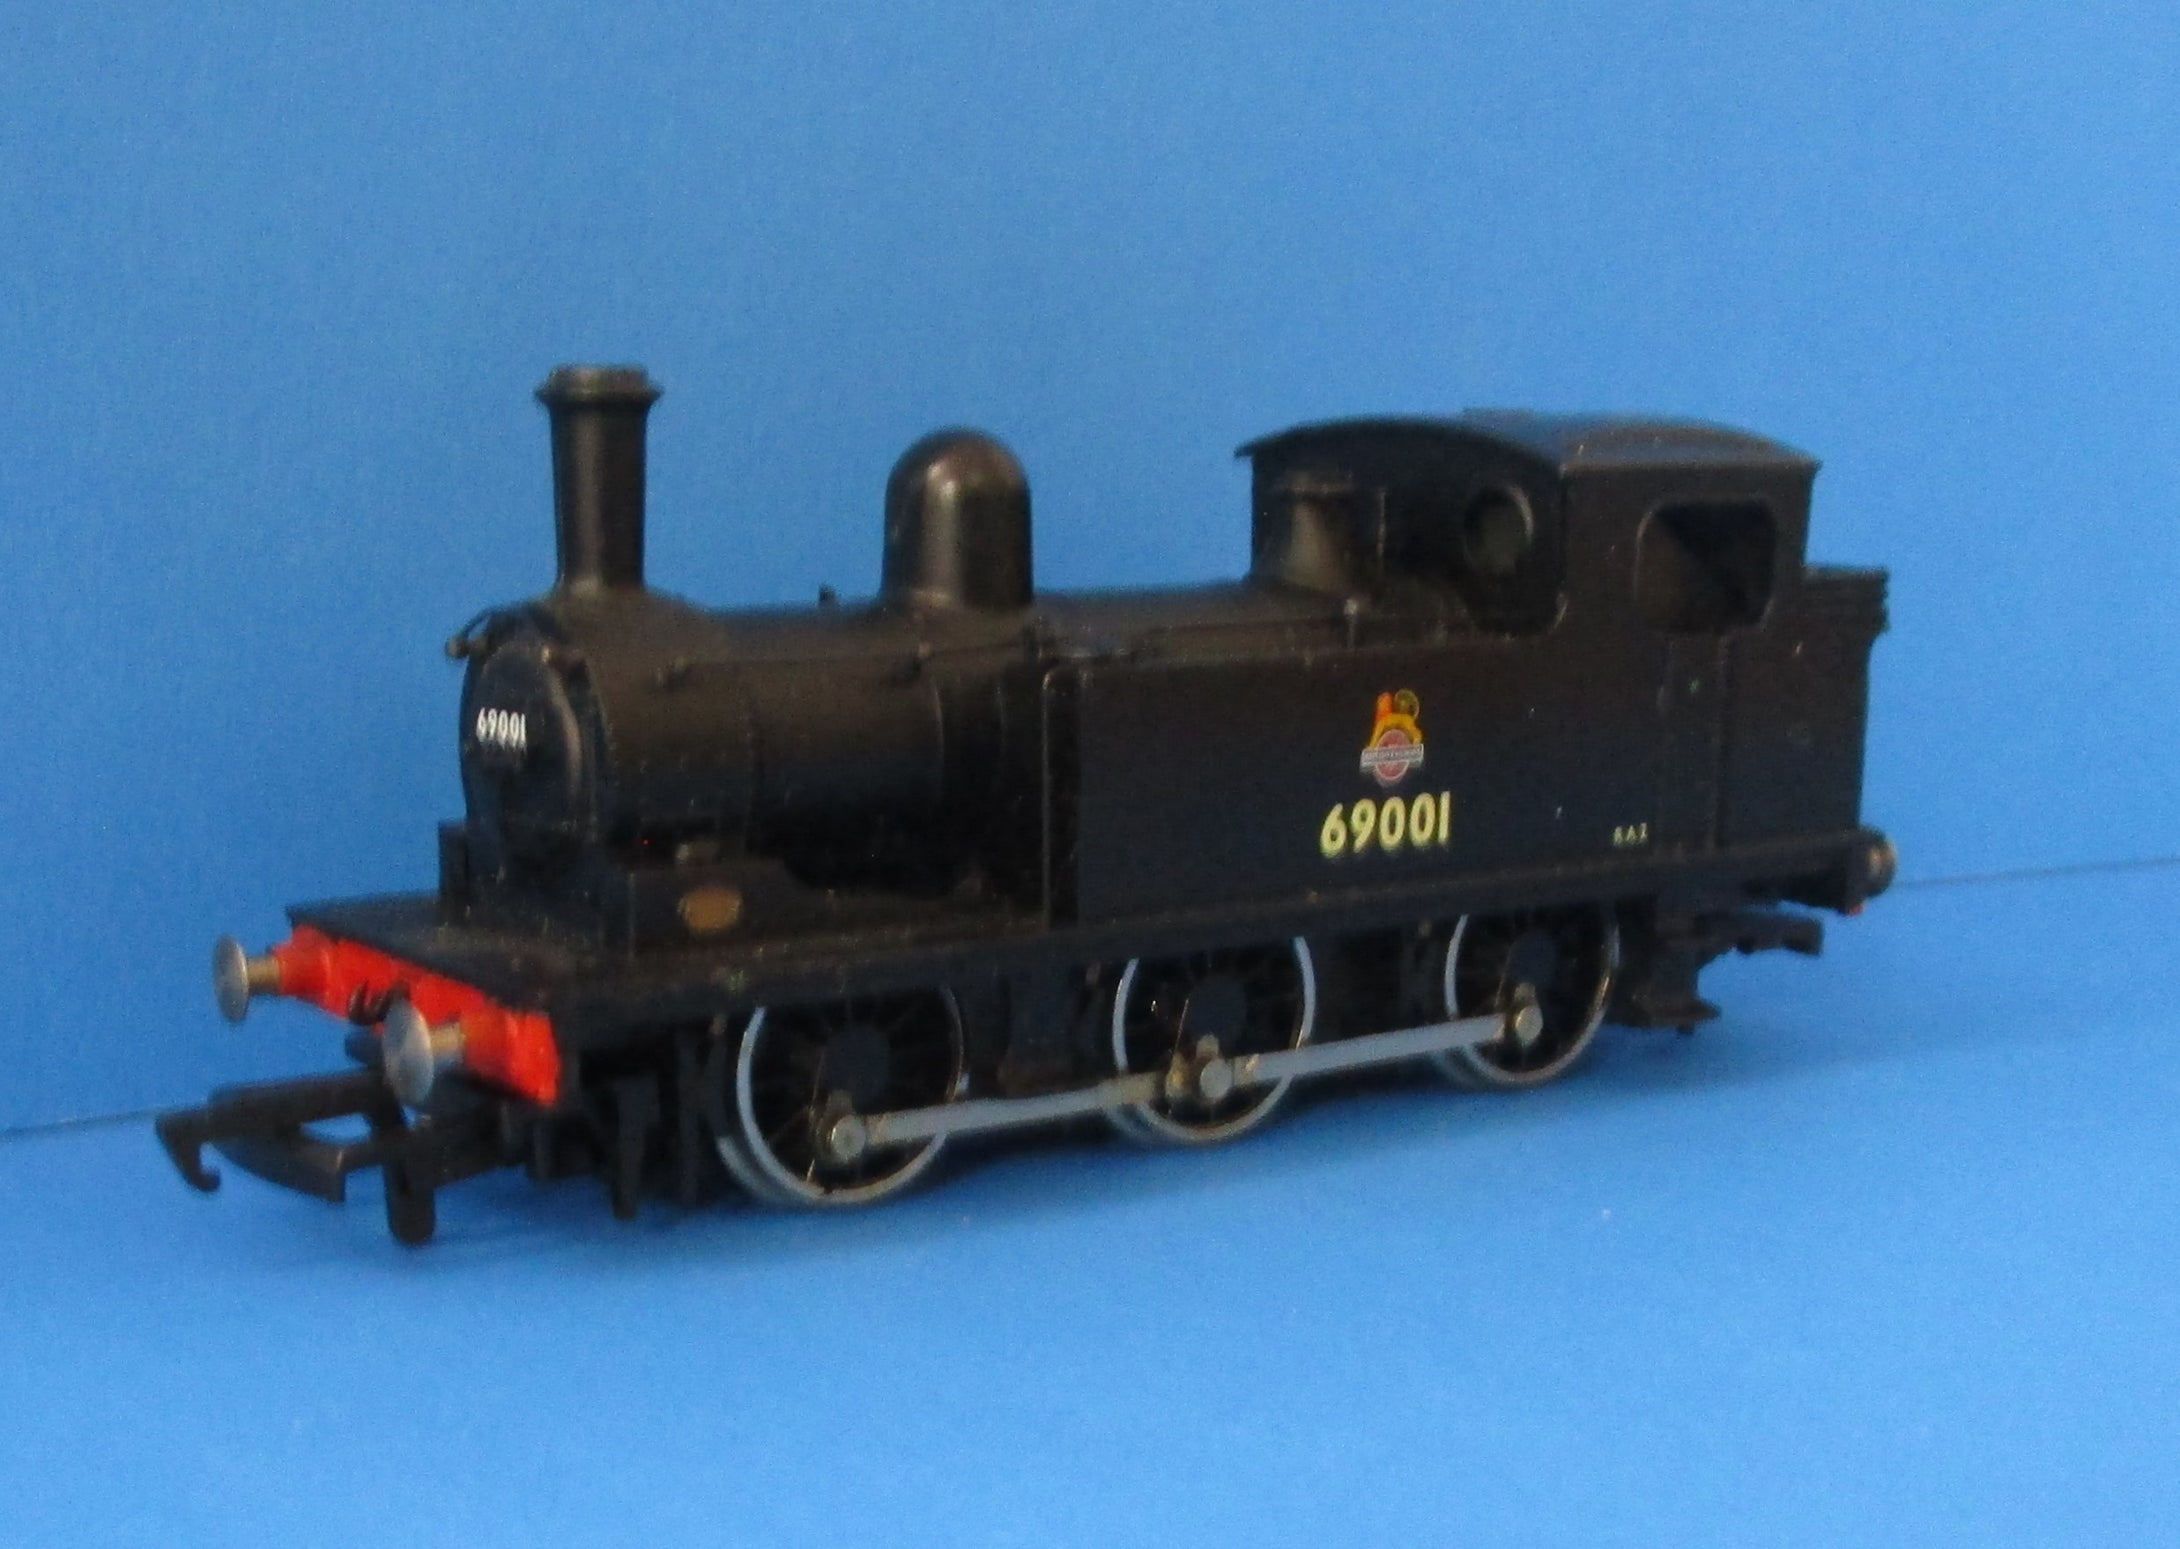 37070 MAINLINE Class J72 0-6-0T 69001 in BR Black -BOXED